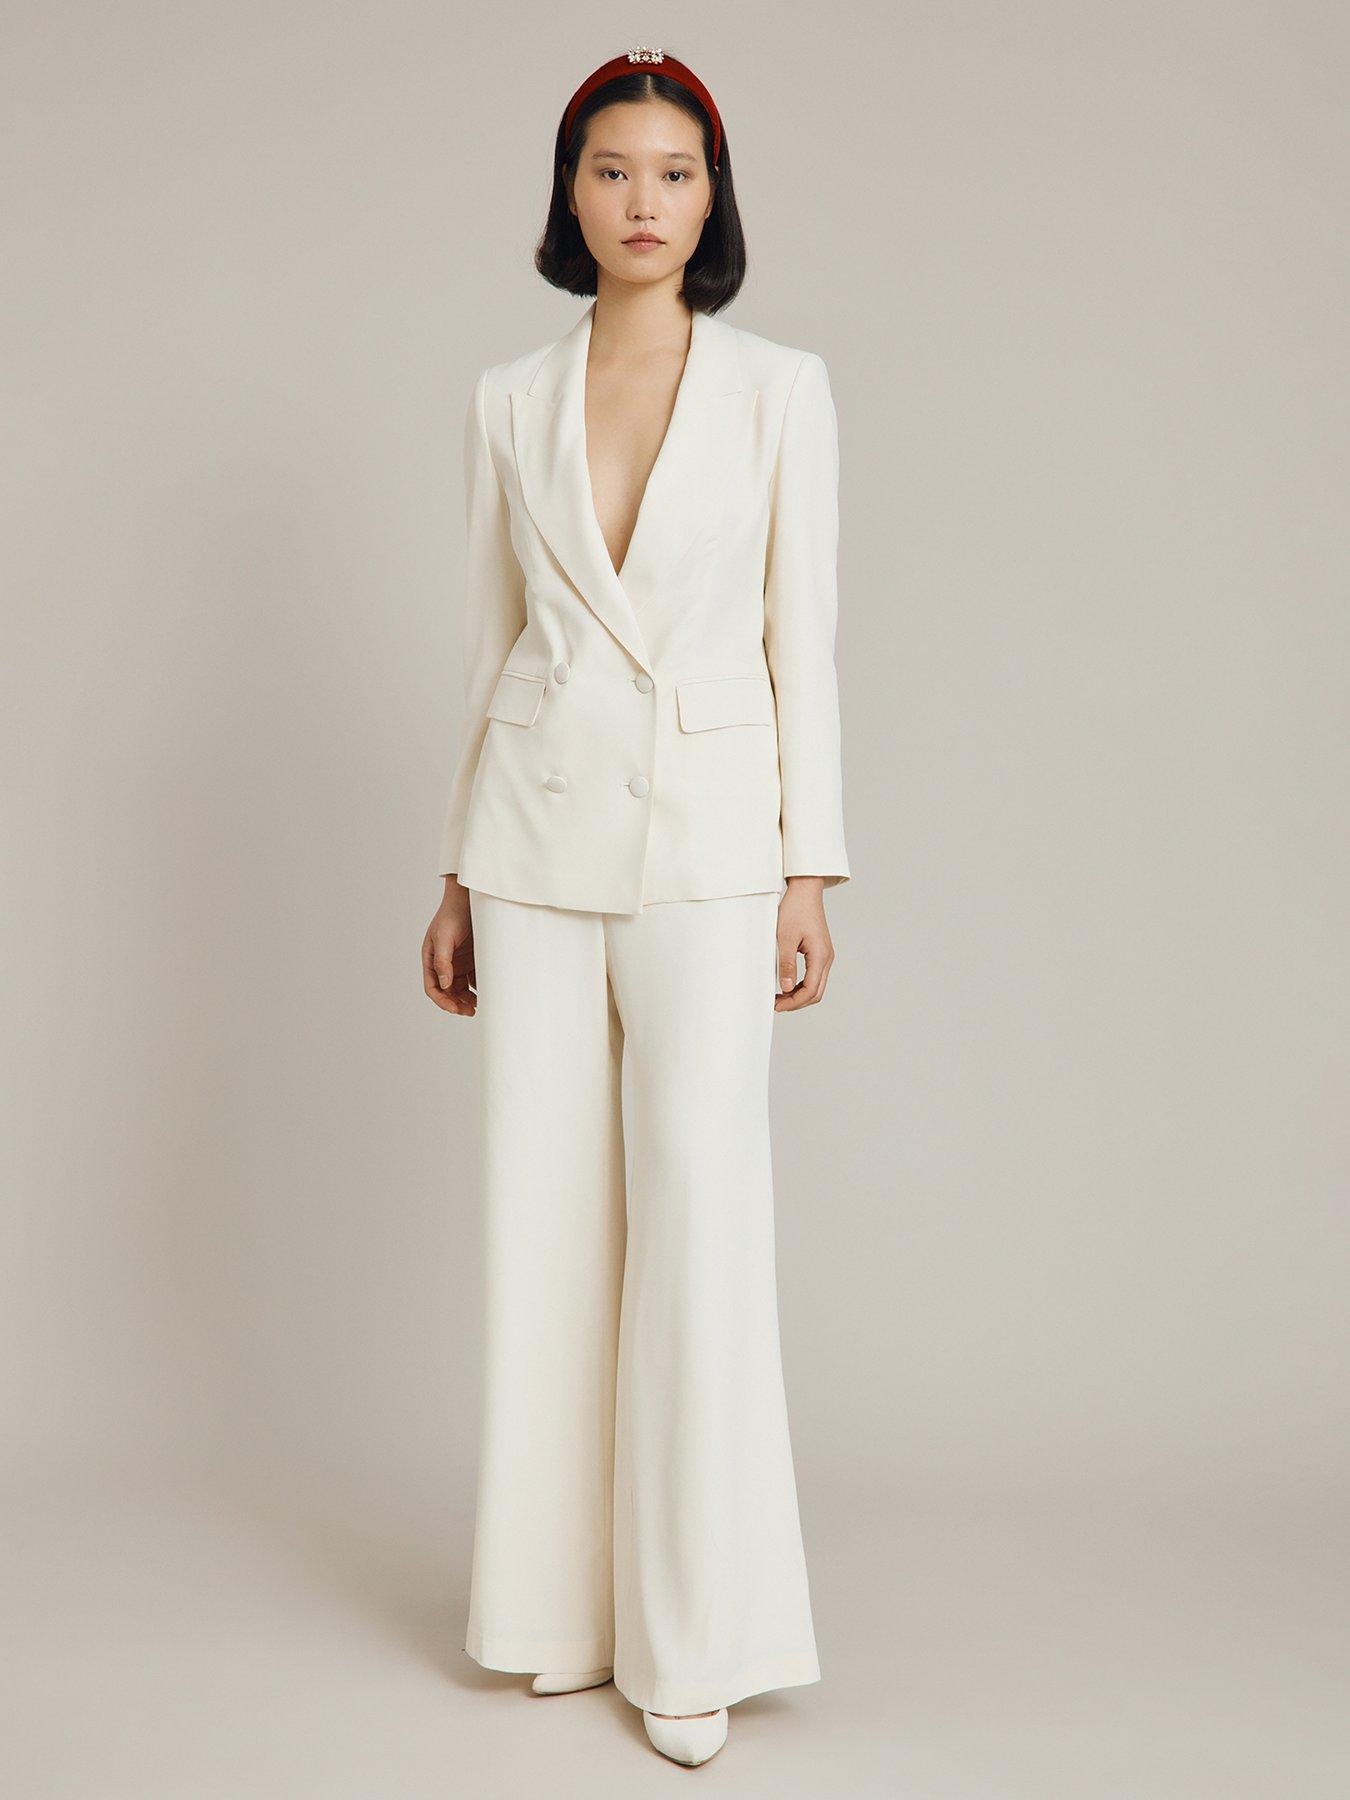 Women's Suits | Tailored & Trouser Suits | PrettyLittleThing